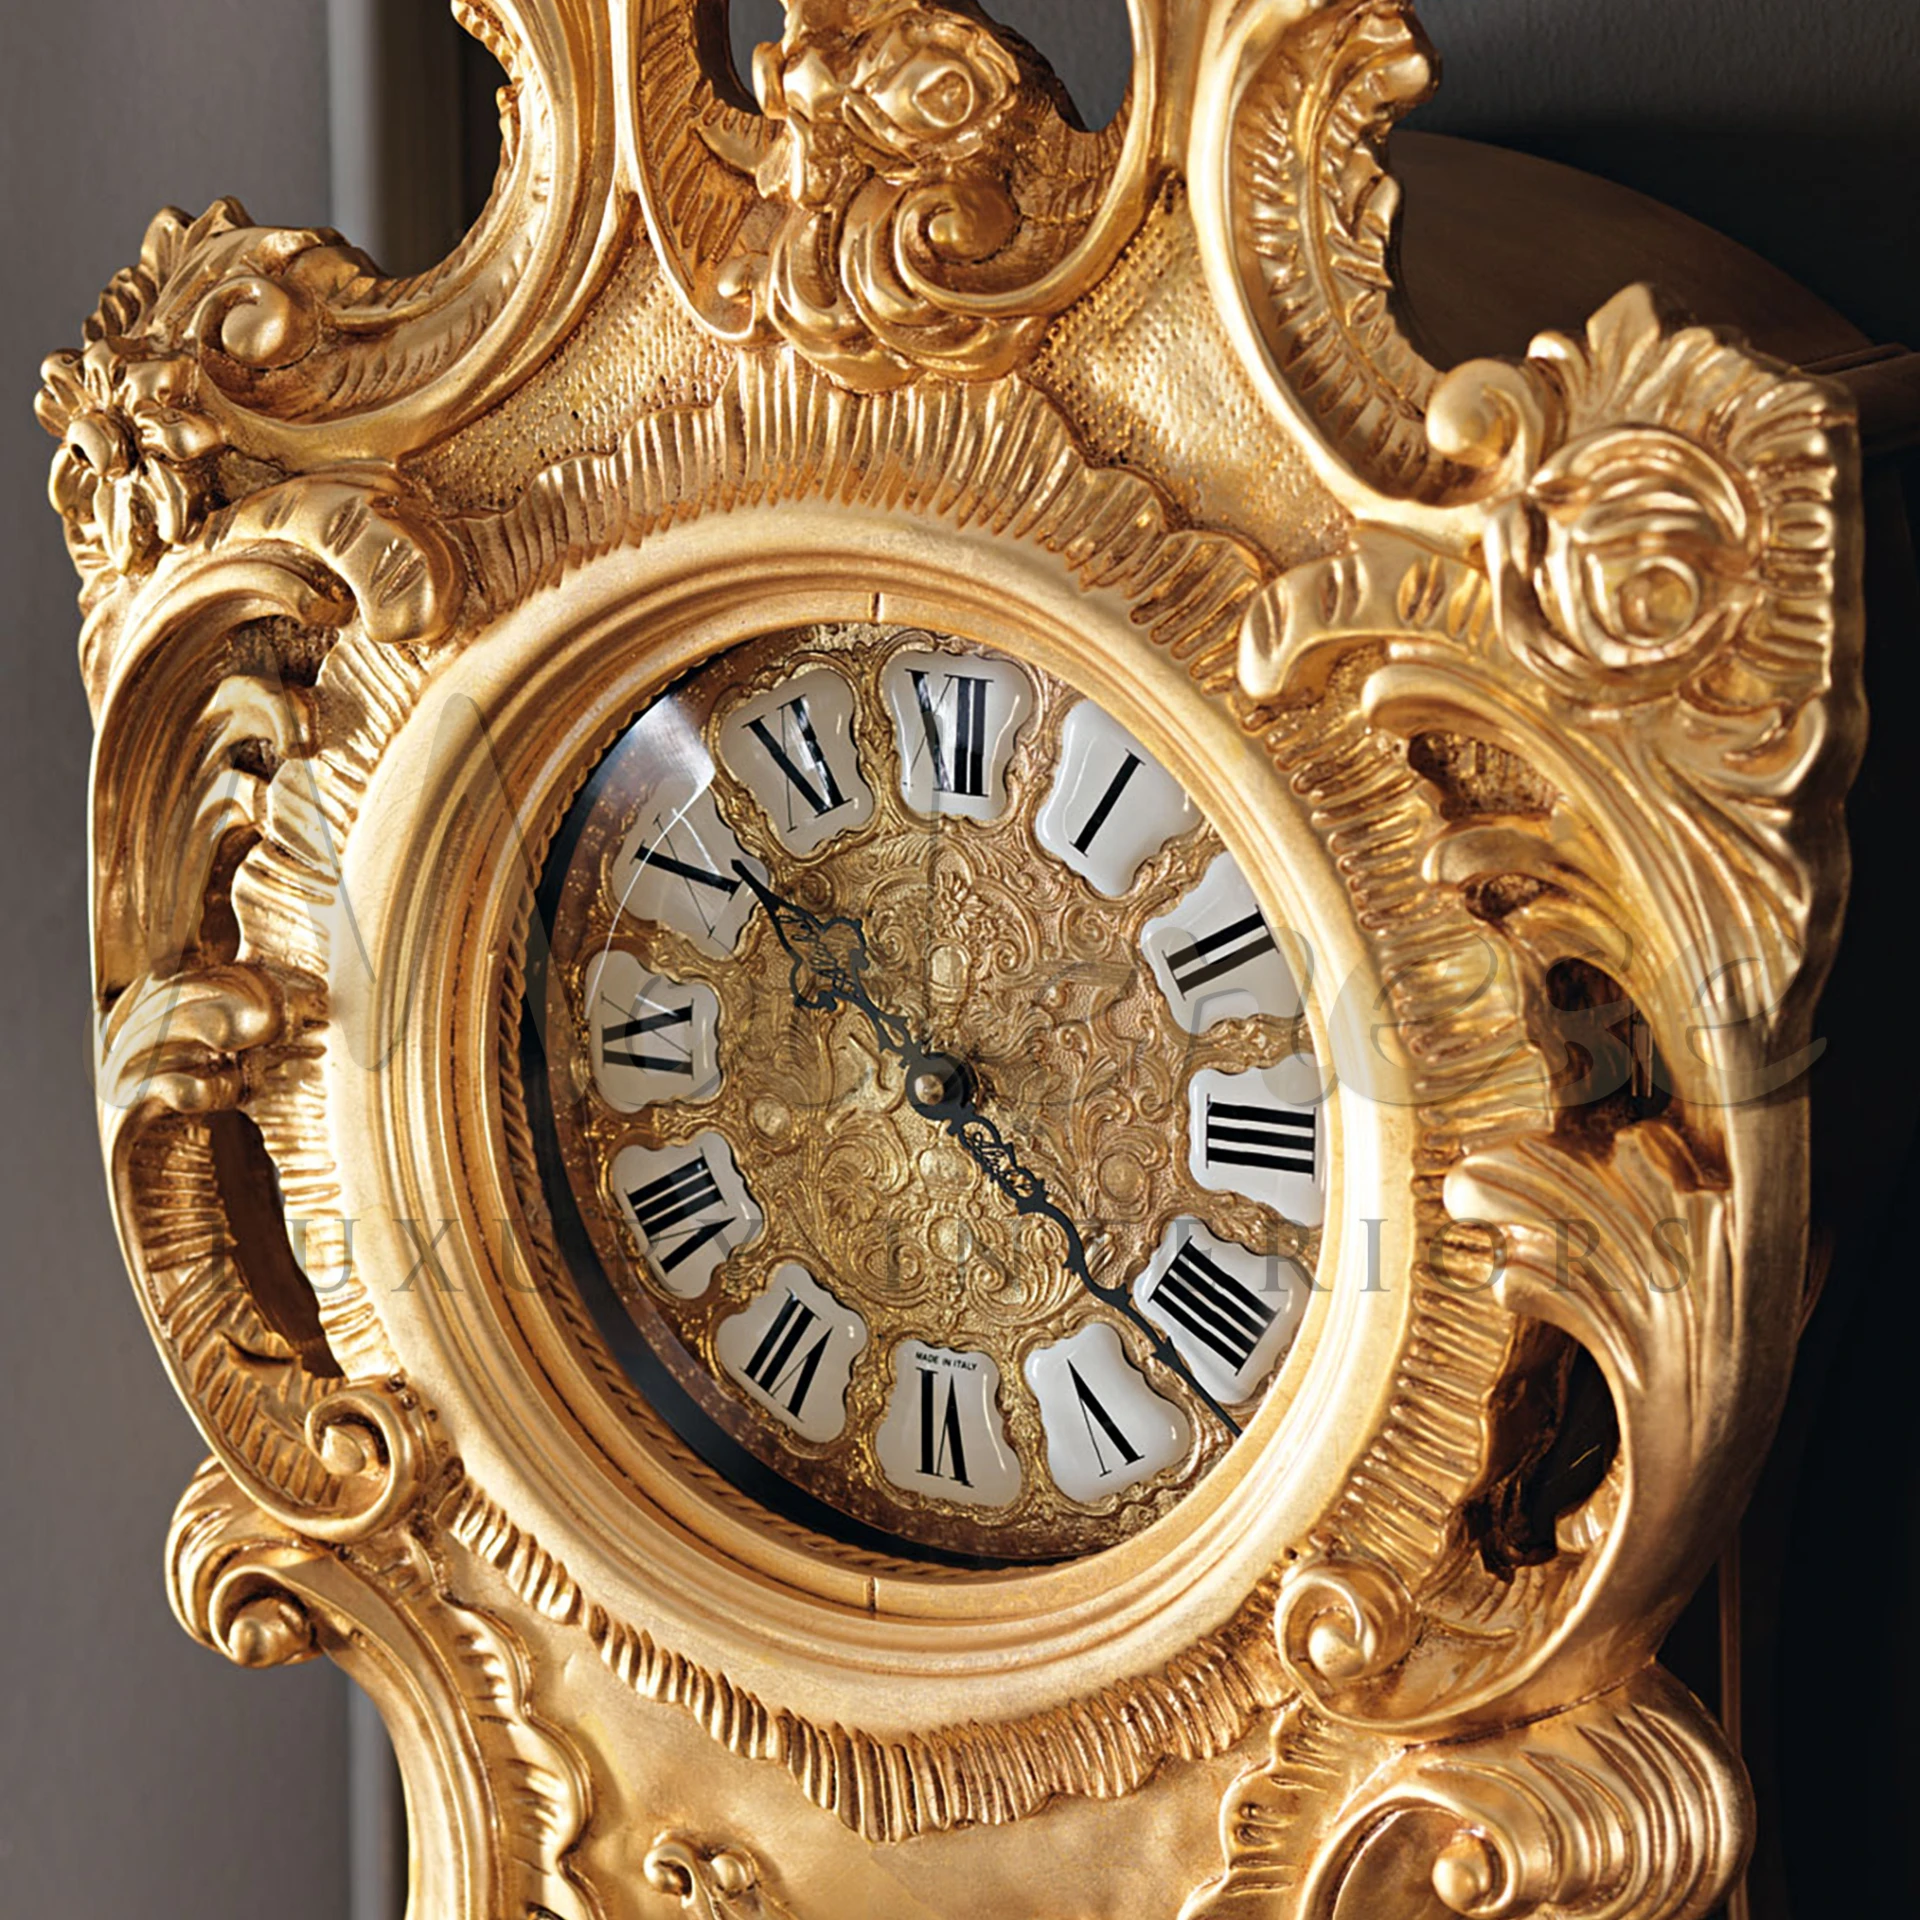 Sumptuous decorative Gold Grandfather Clock in traditional baroque style